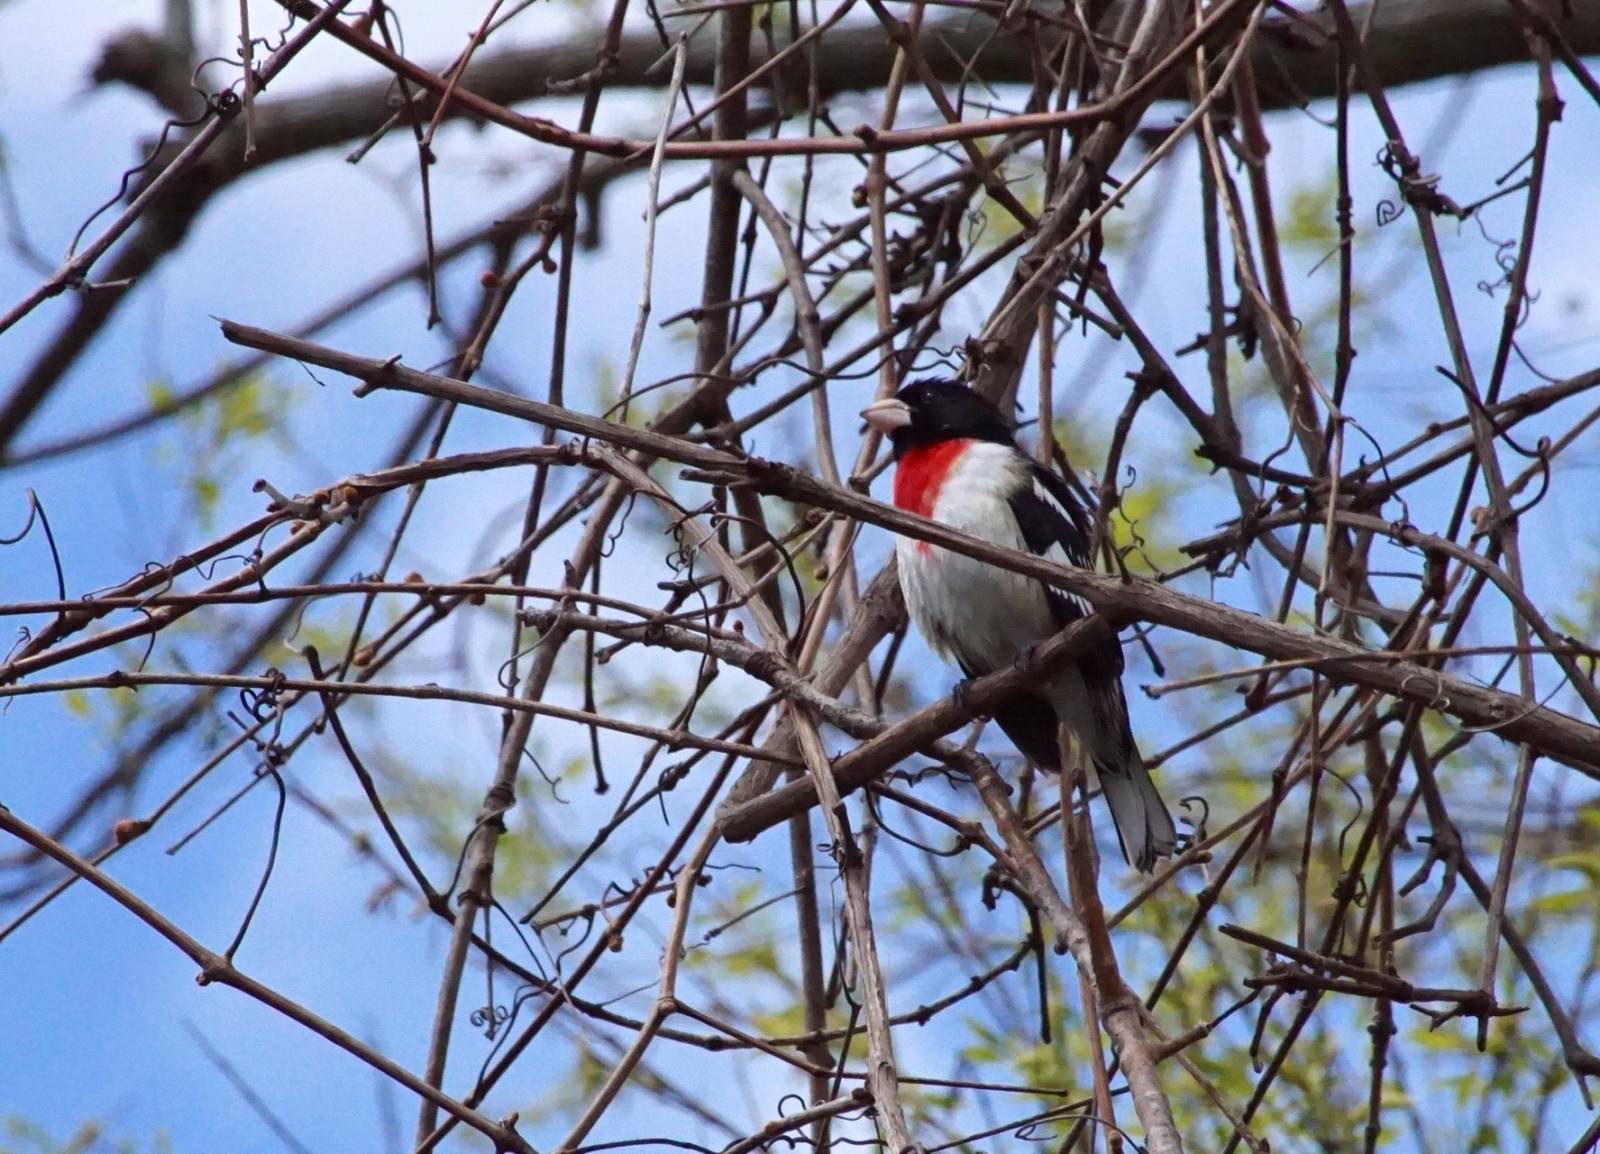 close up of a rose breasted grosbeak perched among many small branches